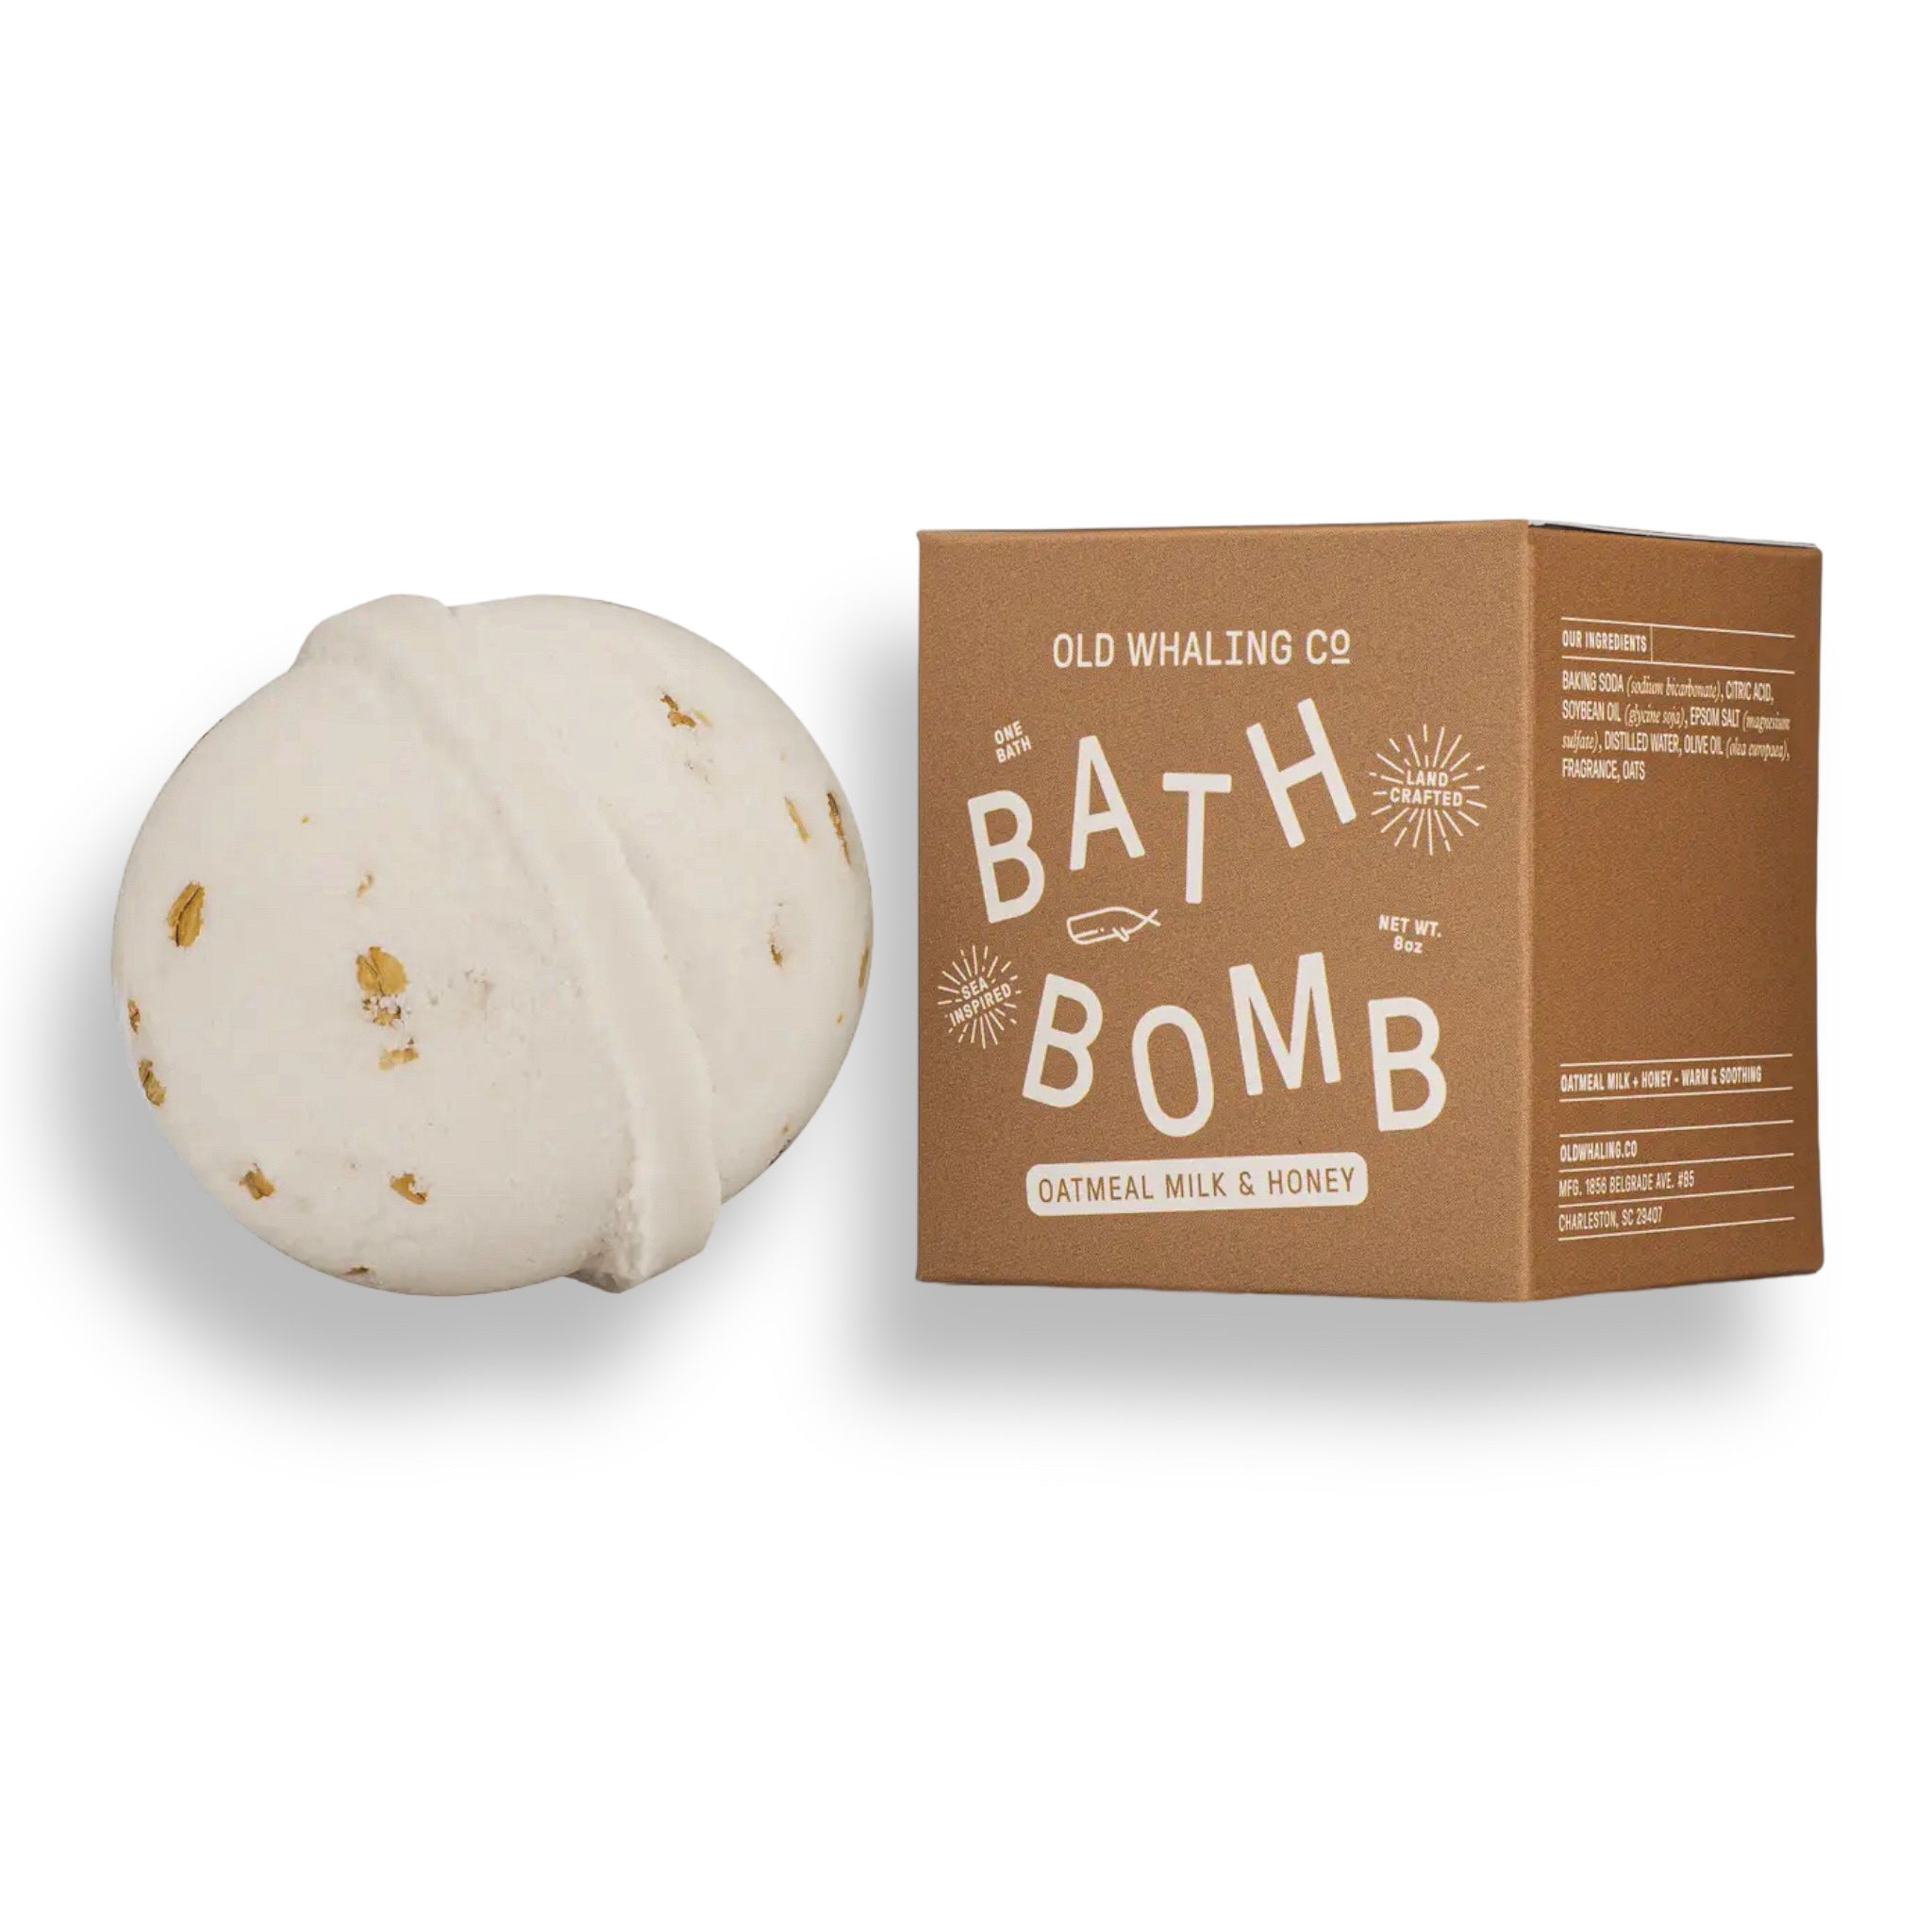 OATMEAL MILK & HONEY Bath Bomb by Old Whaling Co